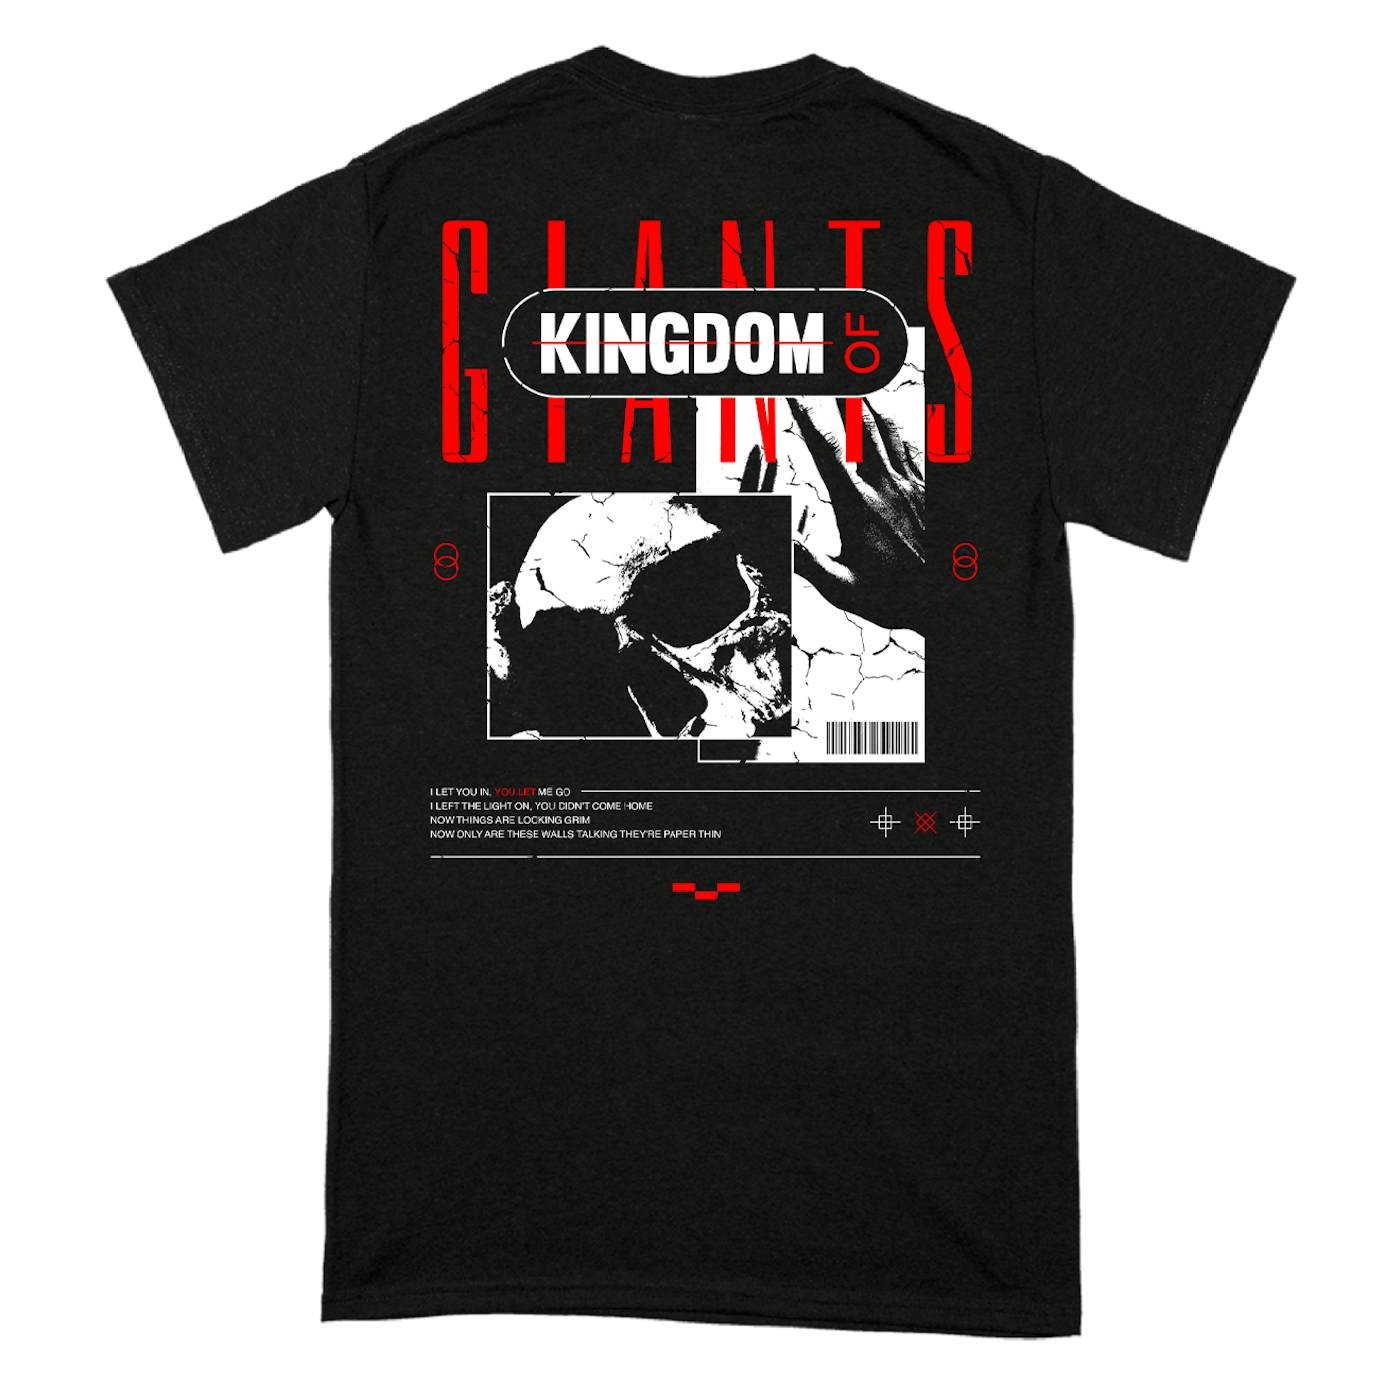 Kingdom Of Giants "I Let You In" T-Shirt